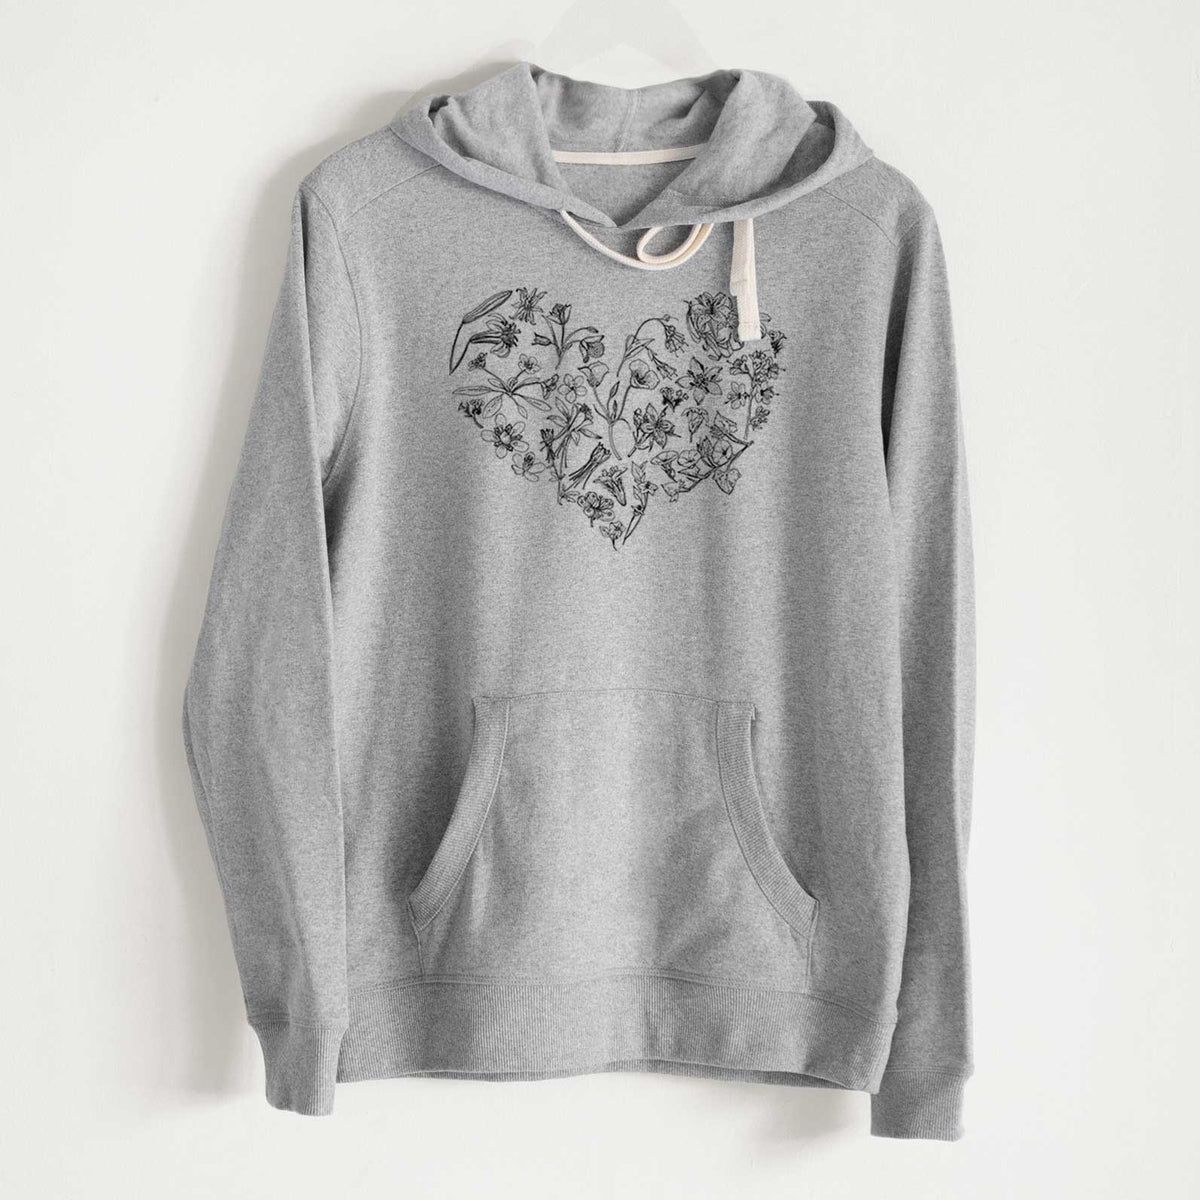 Heart Full of California Mountain Wildflowers - Unisex Recycled Hoodie - CLOSEOUT - FINAL SALE